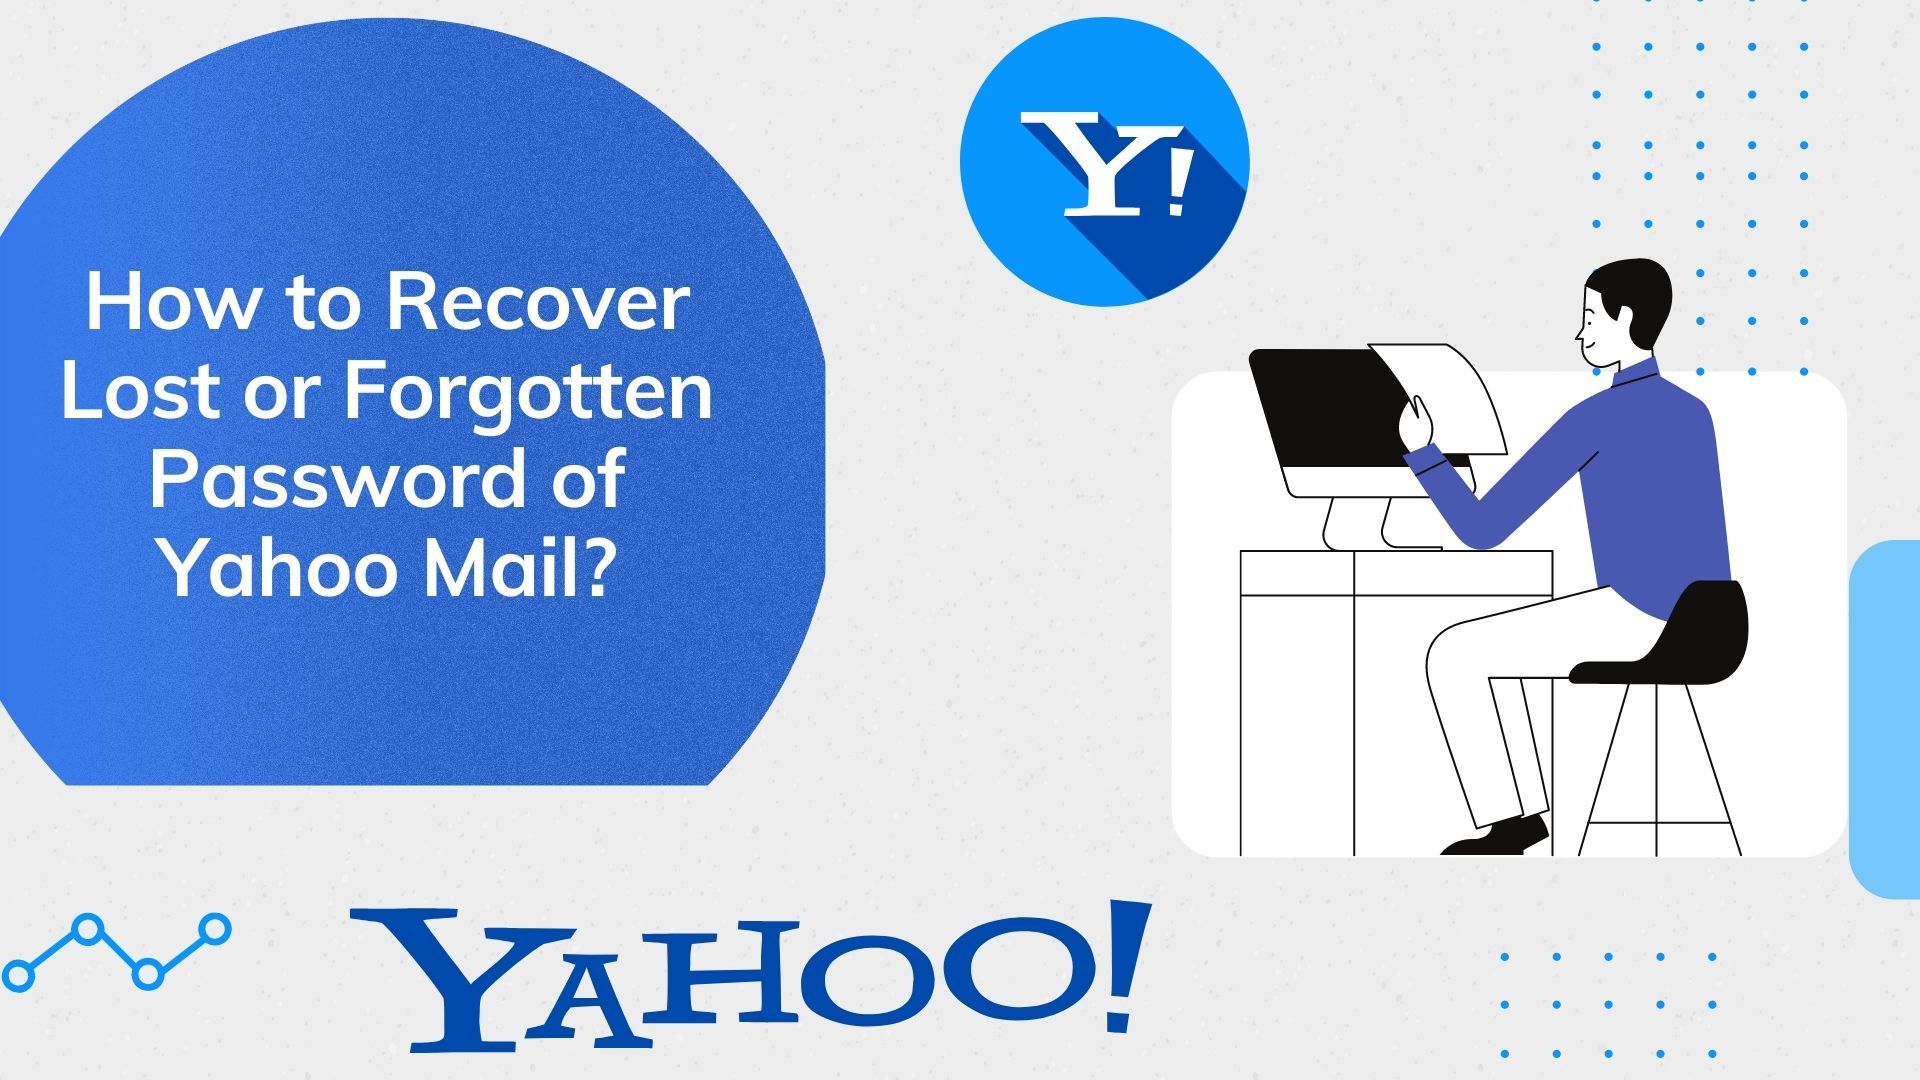 How To Recover Lost Or Forgotten Password Of Yahoo Mail